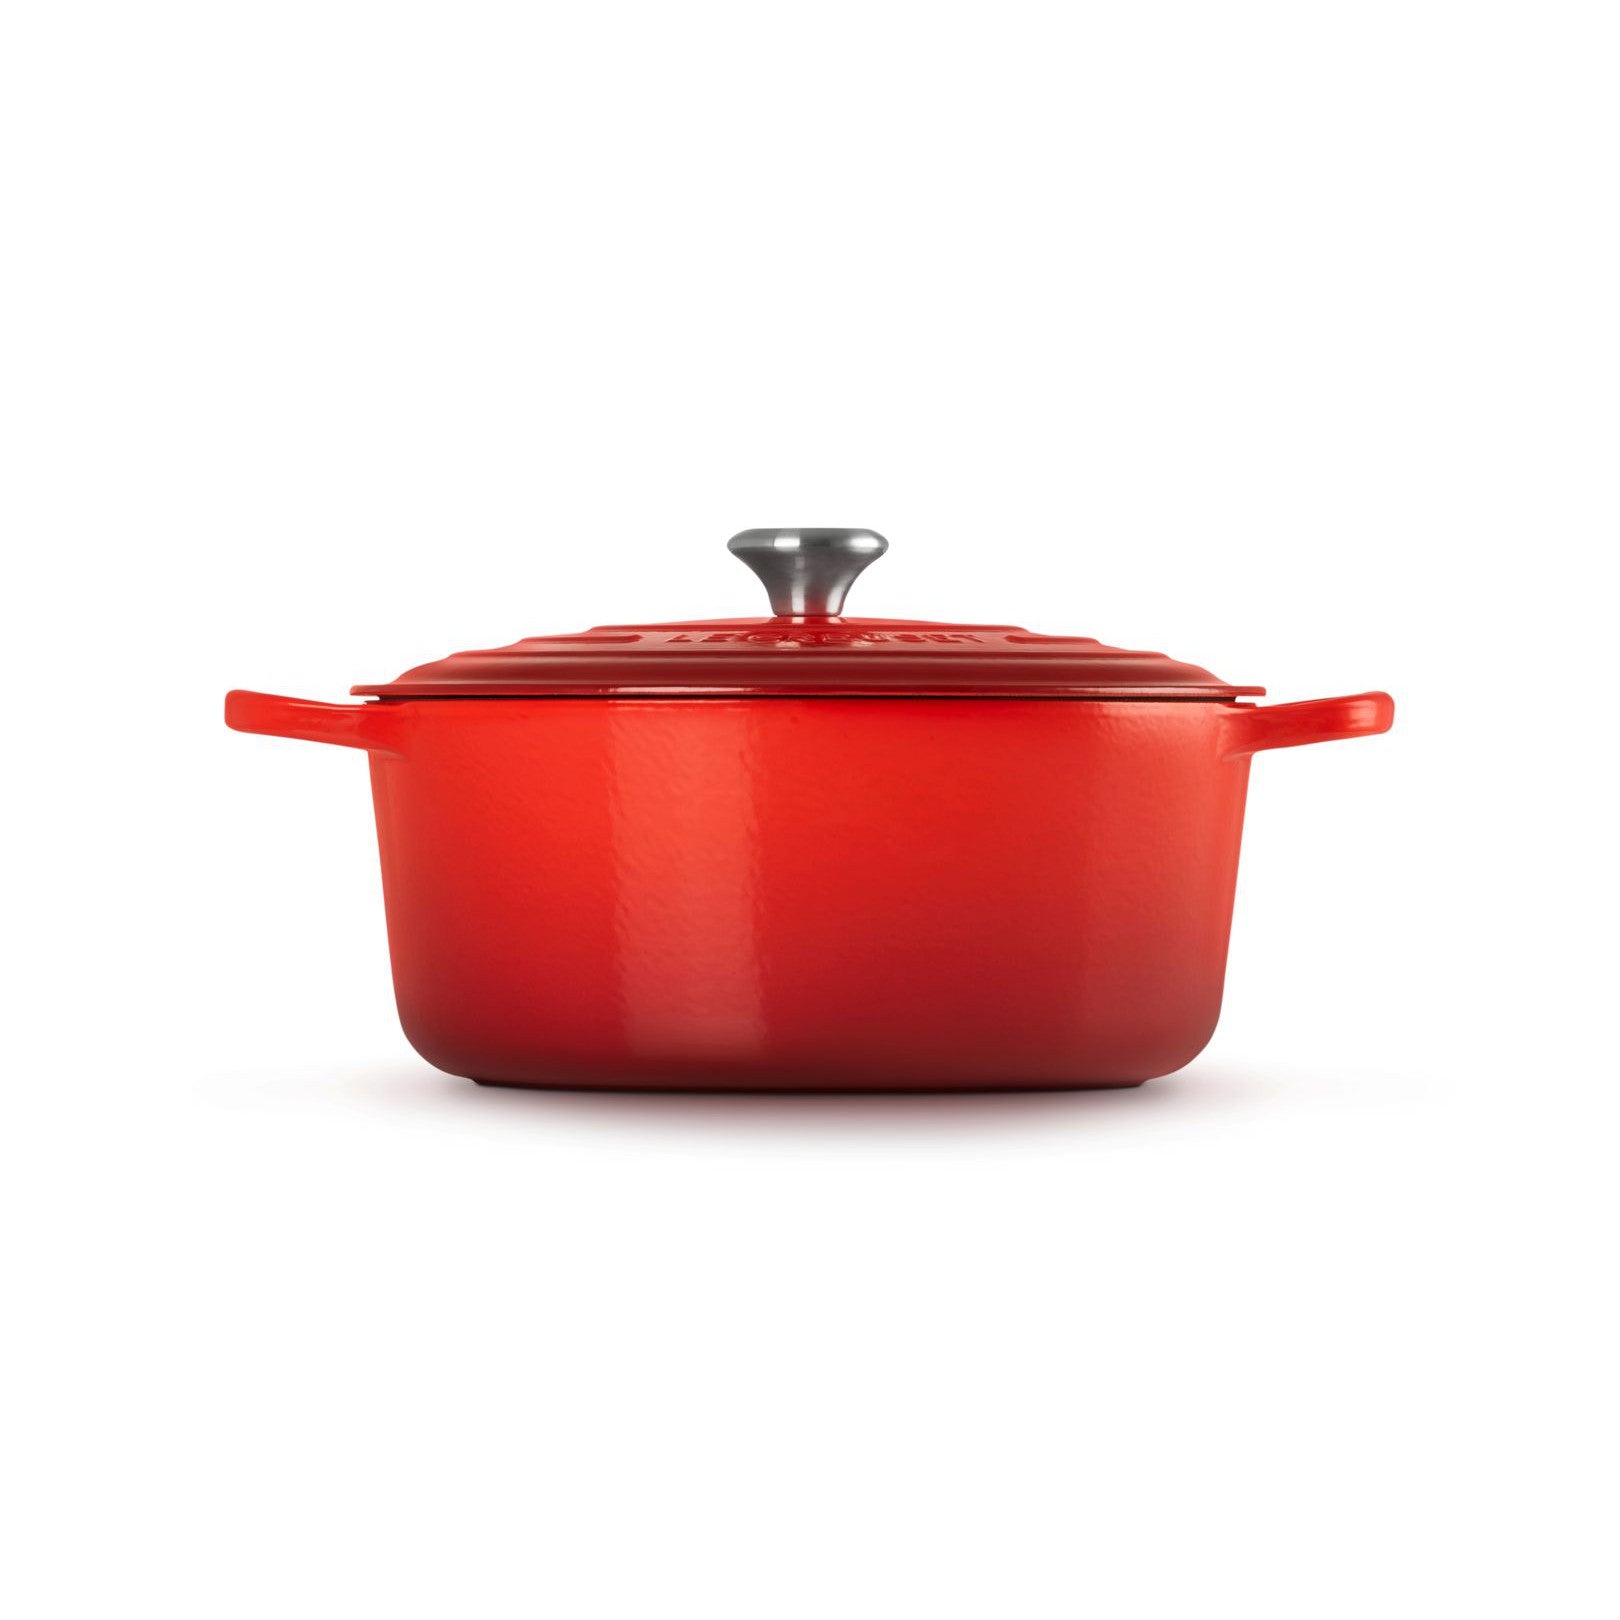 Le Creuset - 8.1L Cherry Red/Cerise French/Dutch Oven (30 cm) Side